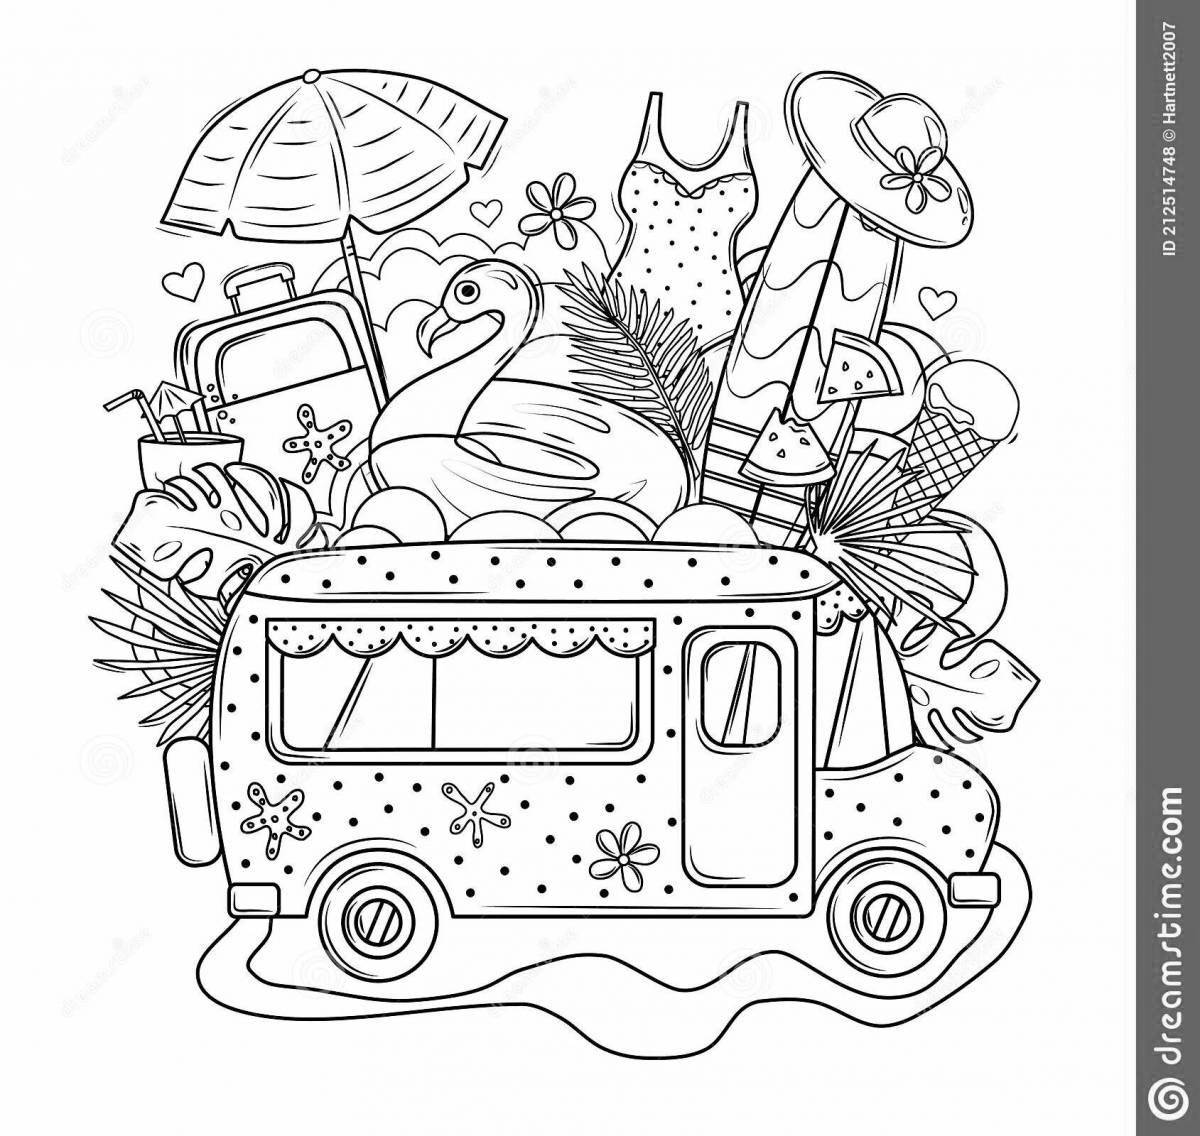 Great travel coloring page for kids